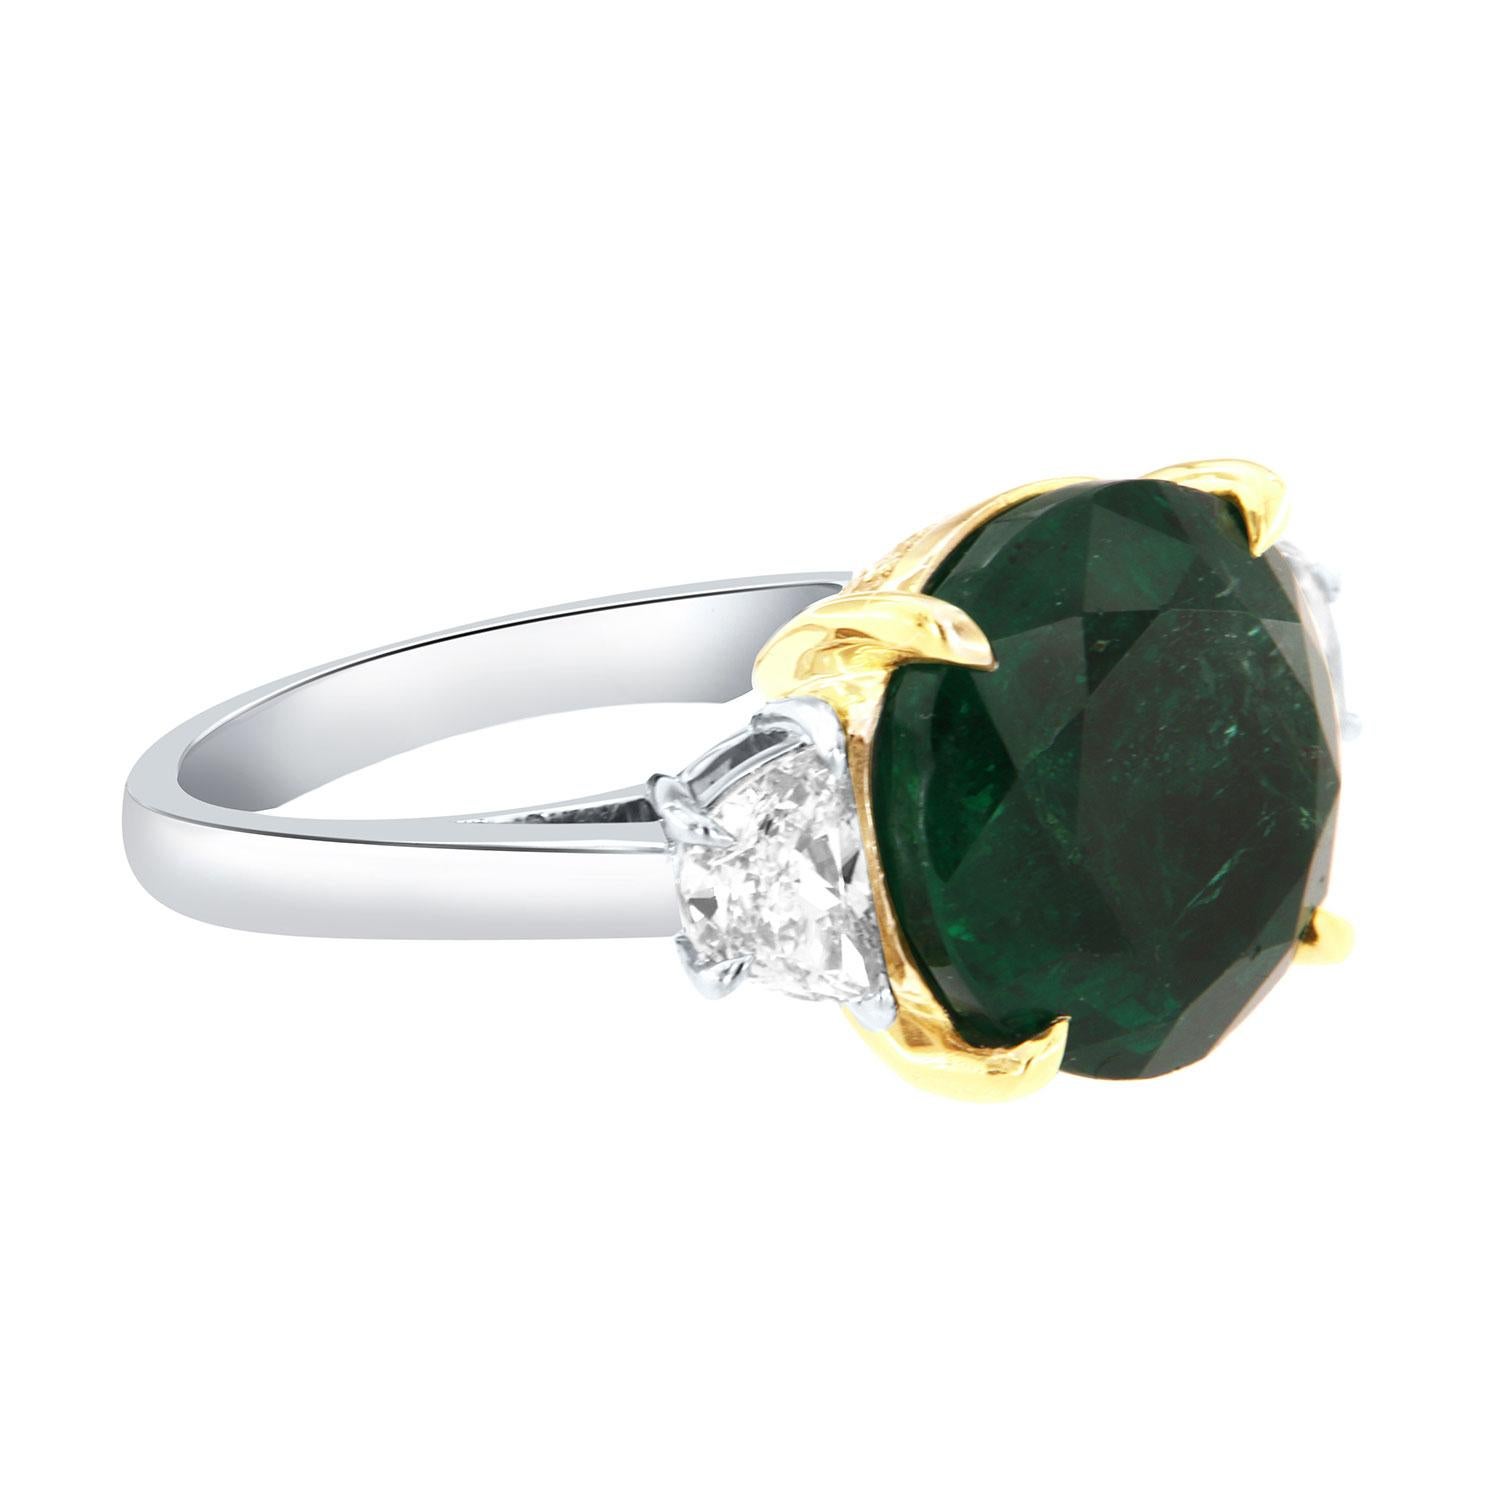 Round Cut GIA Certified 7.47 Round Green Emerald & Half Moon Diamond Platinum & 18KG Ring For Sale